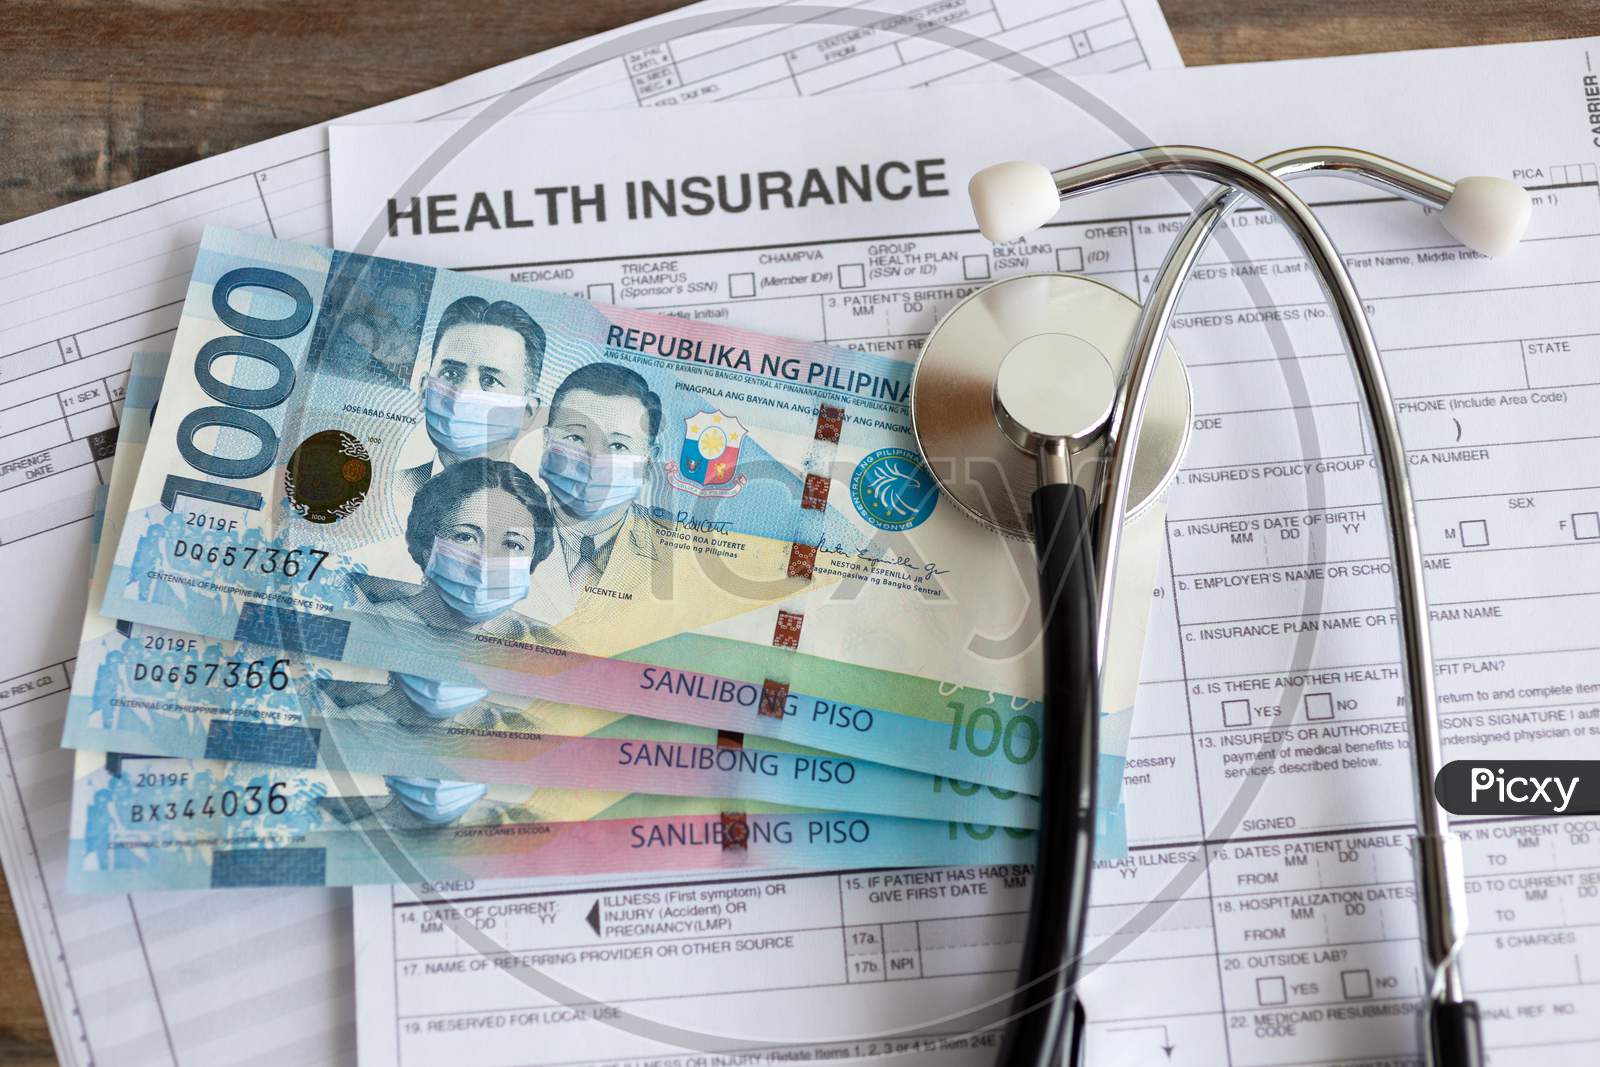 One thousand Philippines peso with face mask on insurance paper bill. Health care cost during coronavirus covid outbreak concept